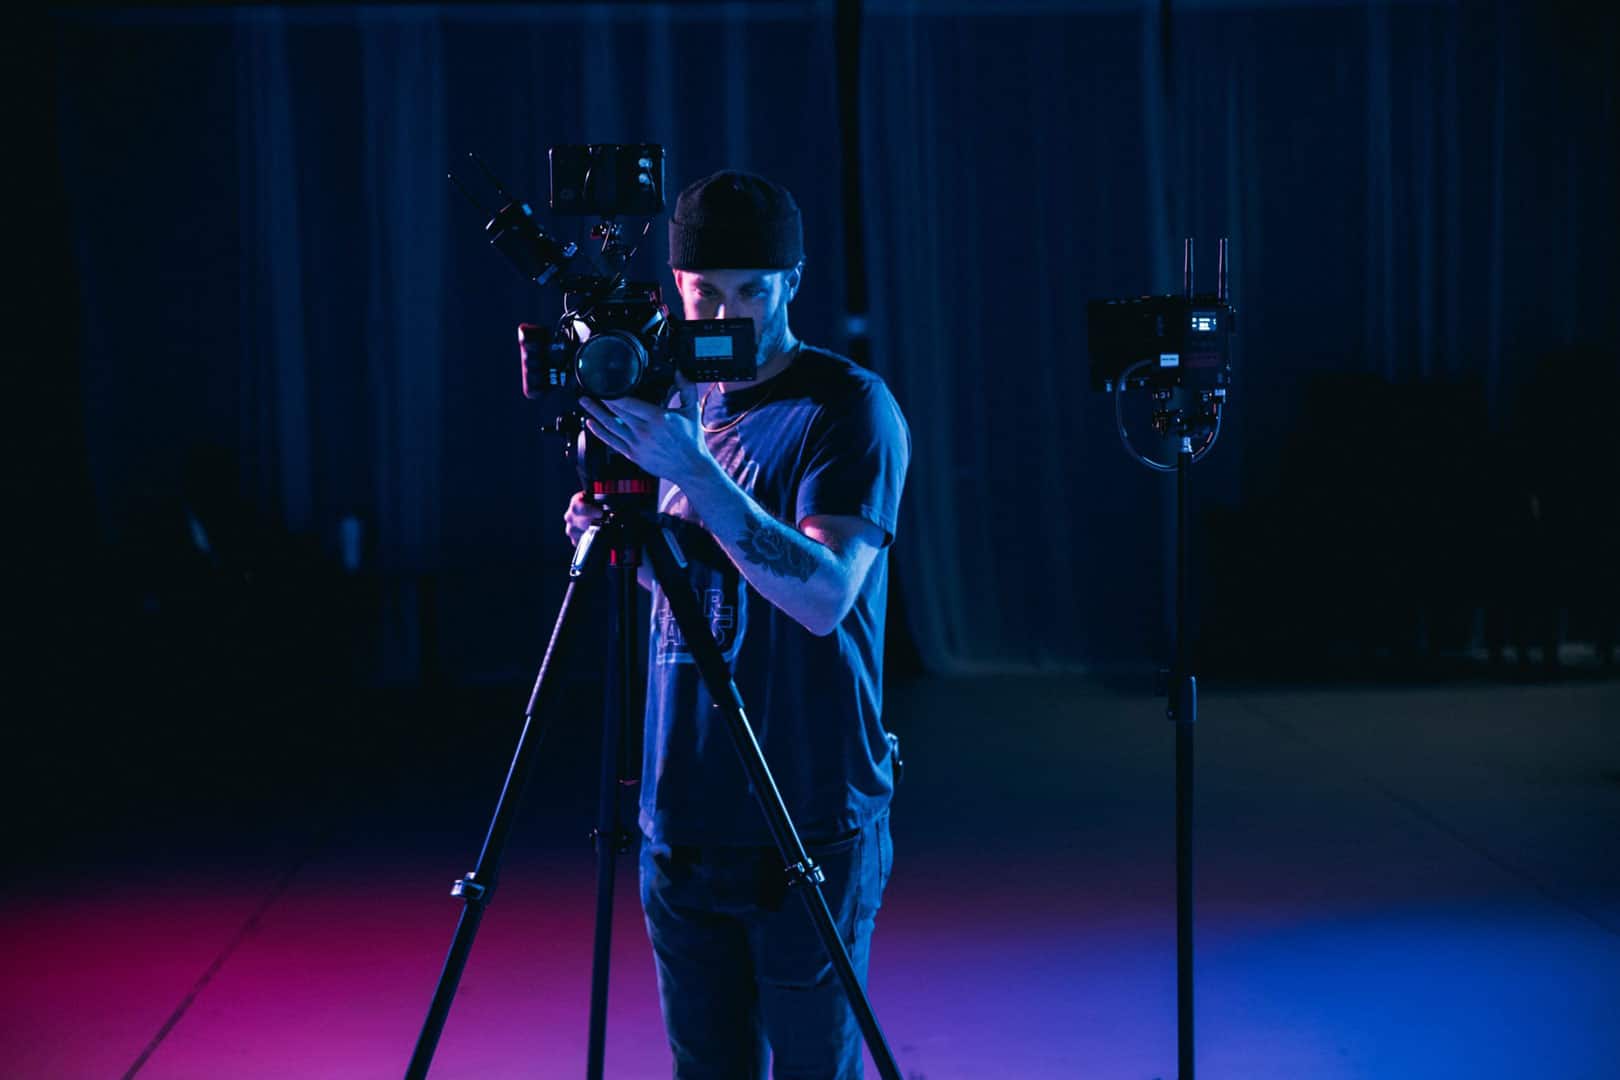 Camera Man Film and Virtual Production Course | AIE